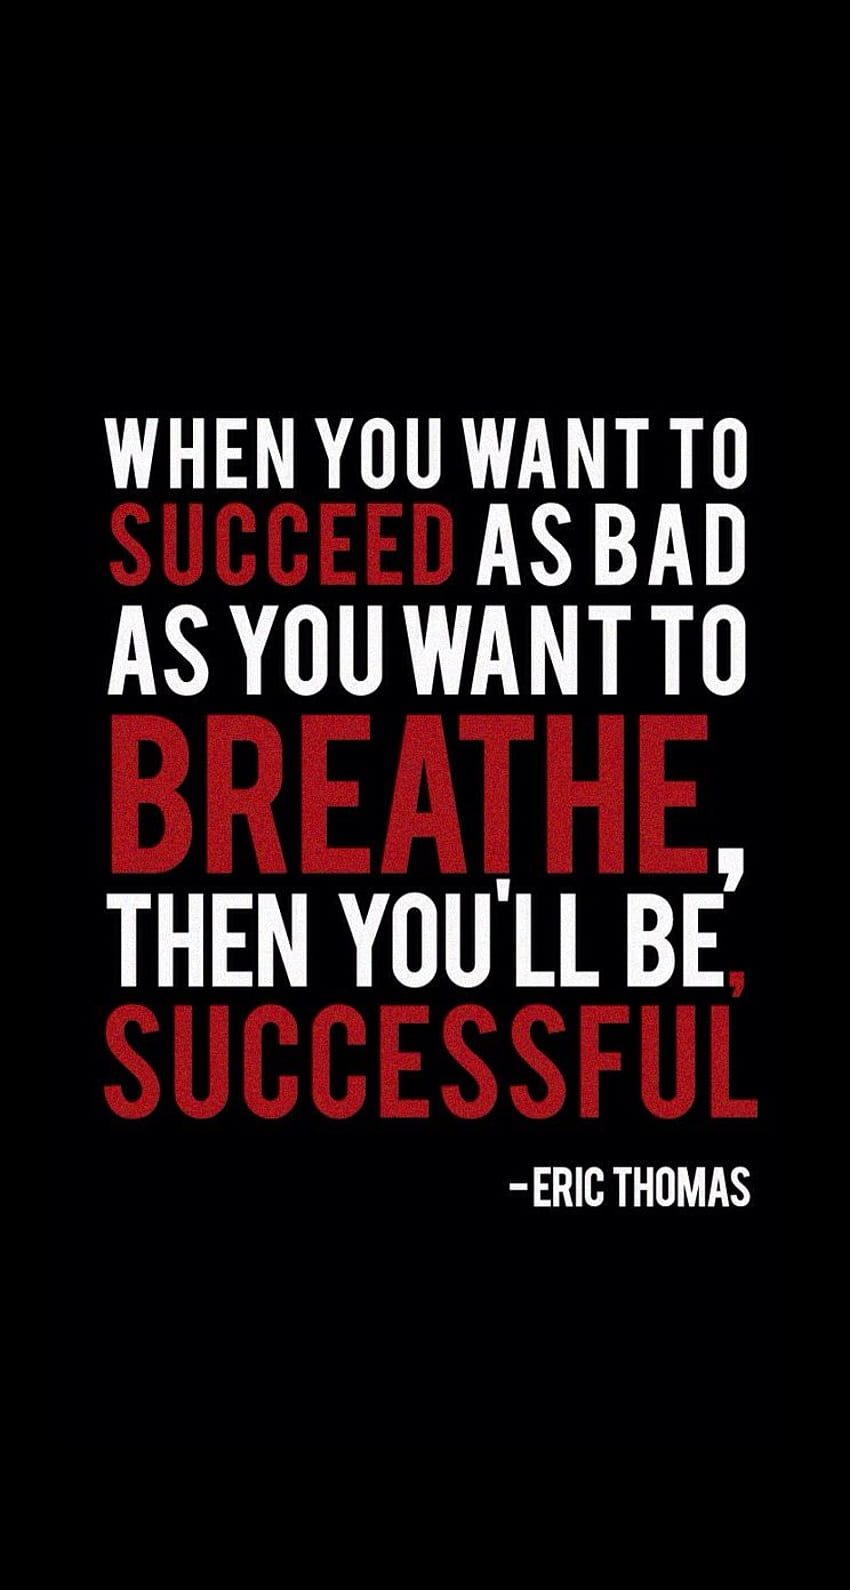 Beaufiful Eric Thomas Quotes - Powerful Quotes Post Here HD phone wallpaper